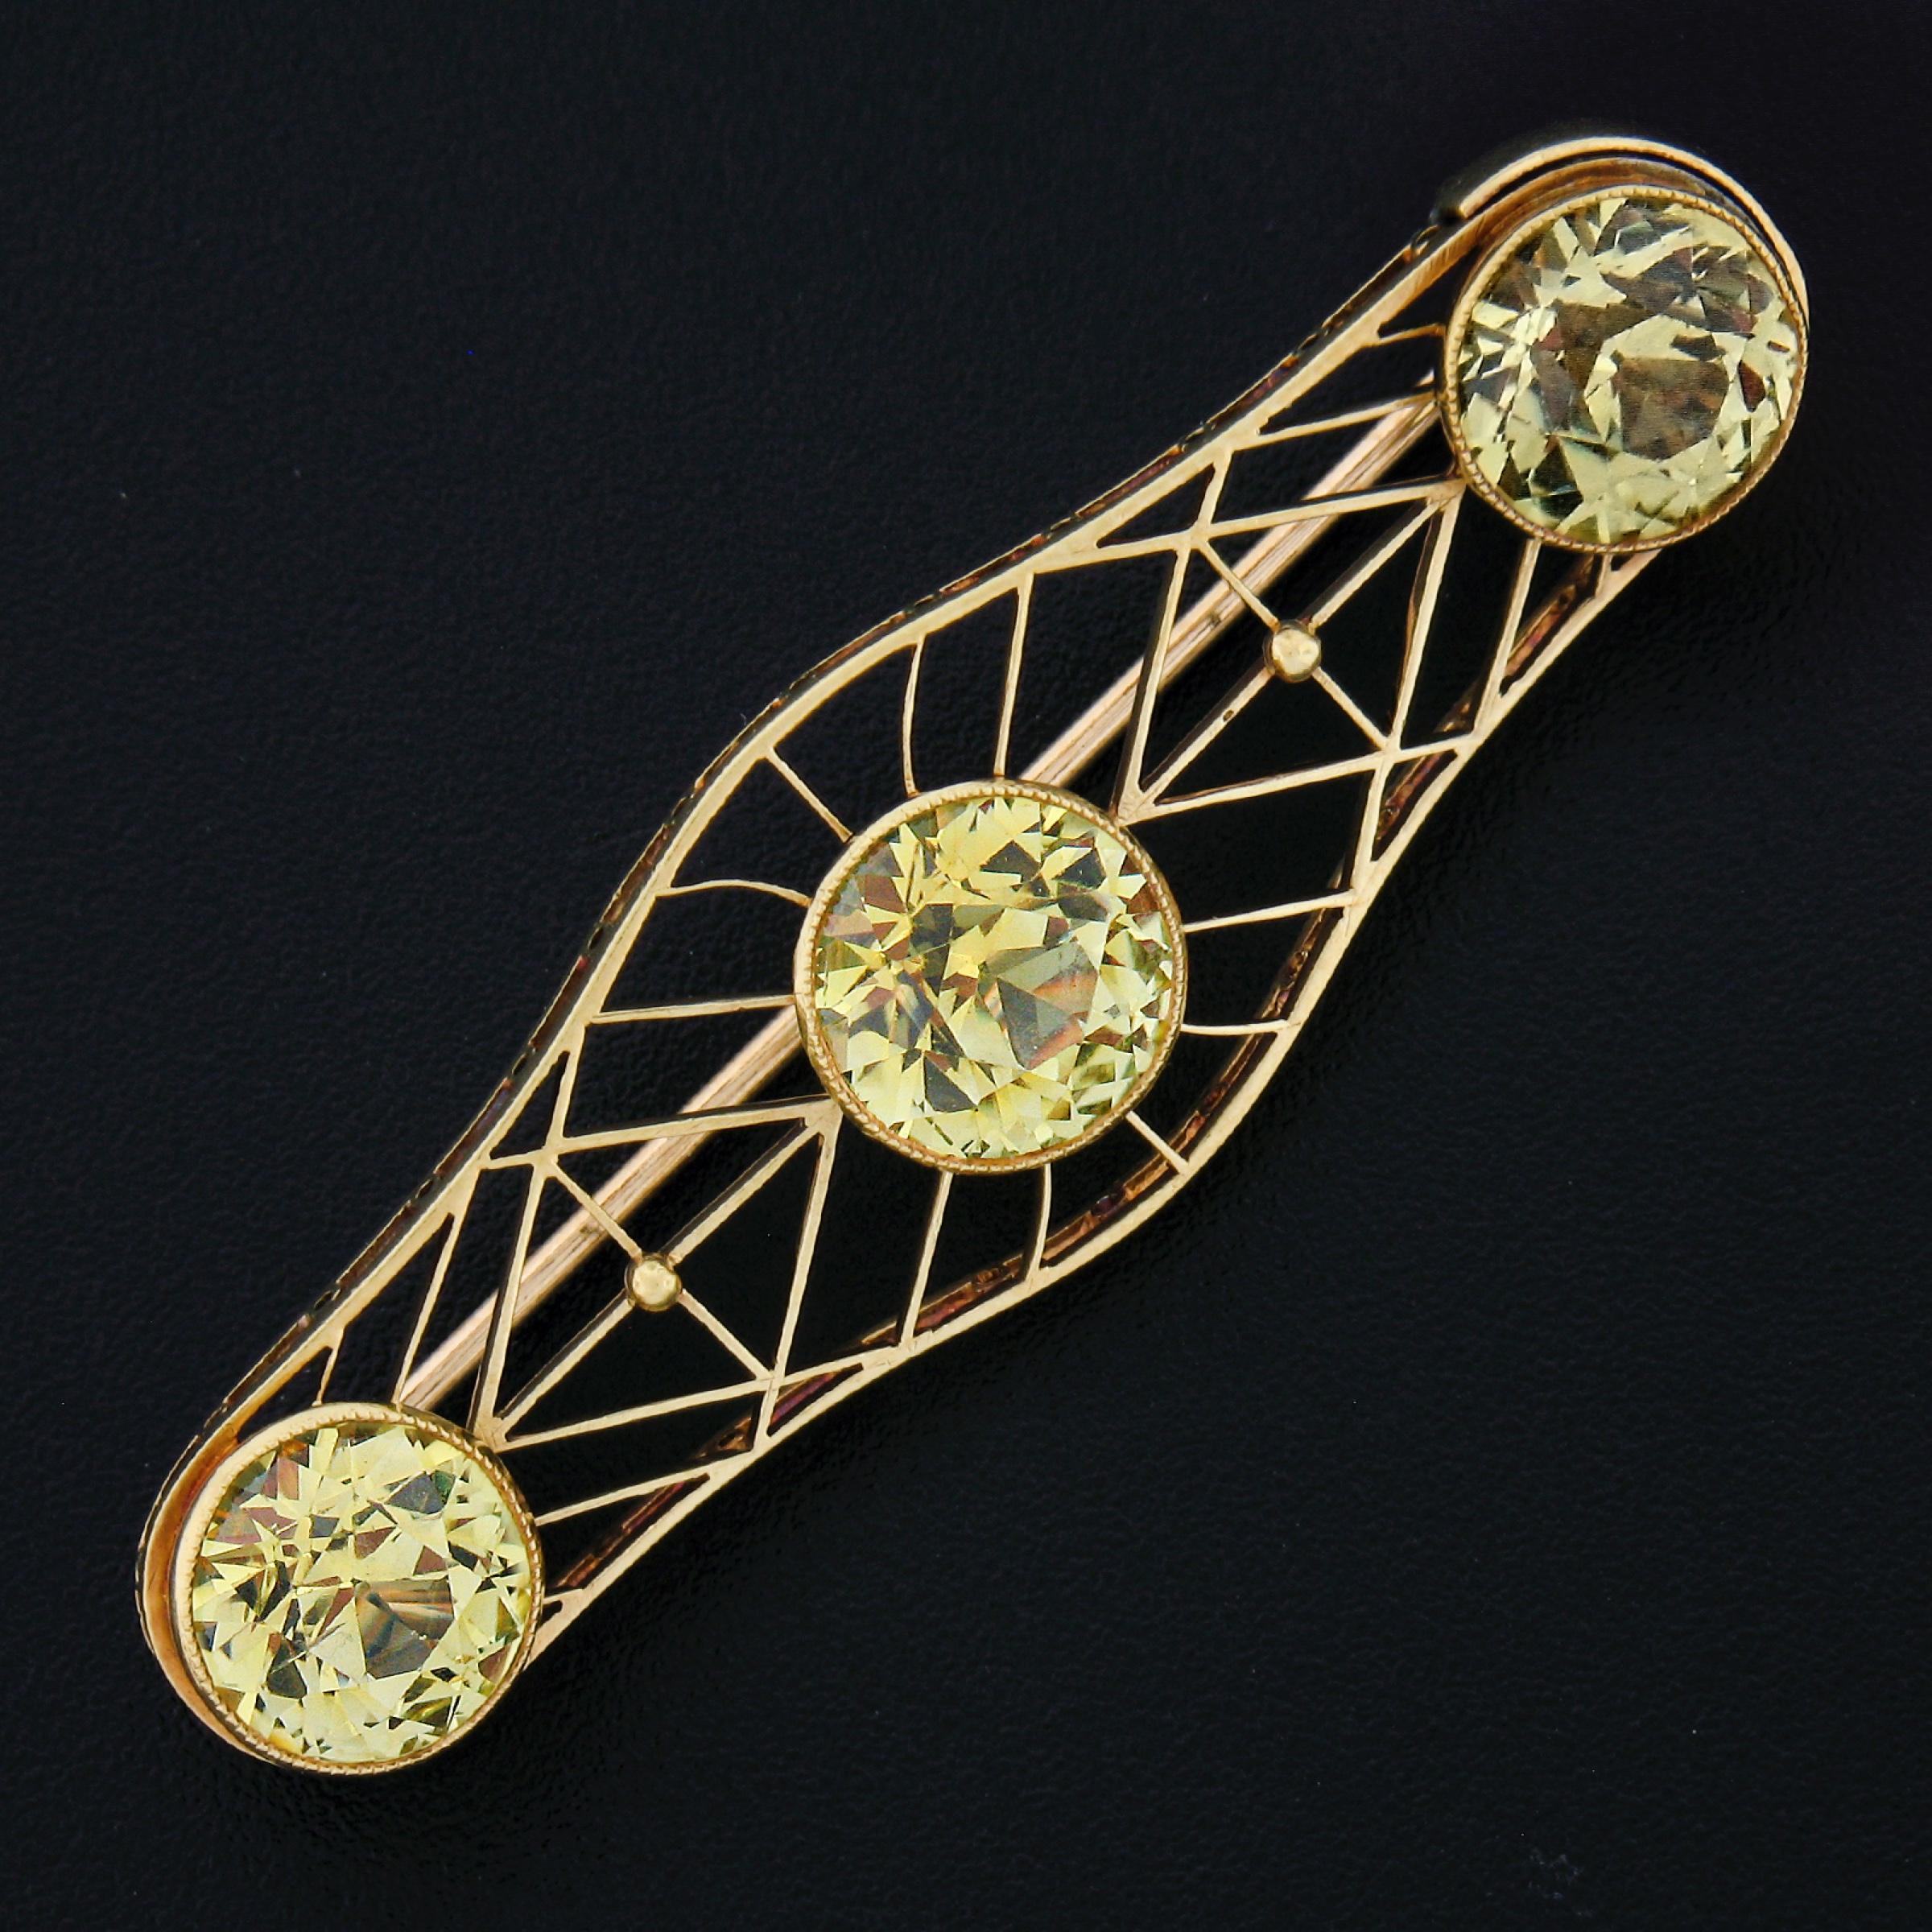 This breathtaking and well made antique brooch is crafted in solid 14k yellow gold and features a truly elegant mosaic open work design that is neatly milgrain bezel set with 3 gorgeous synthetic sapphire stones across their center. Two of these